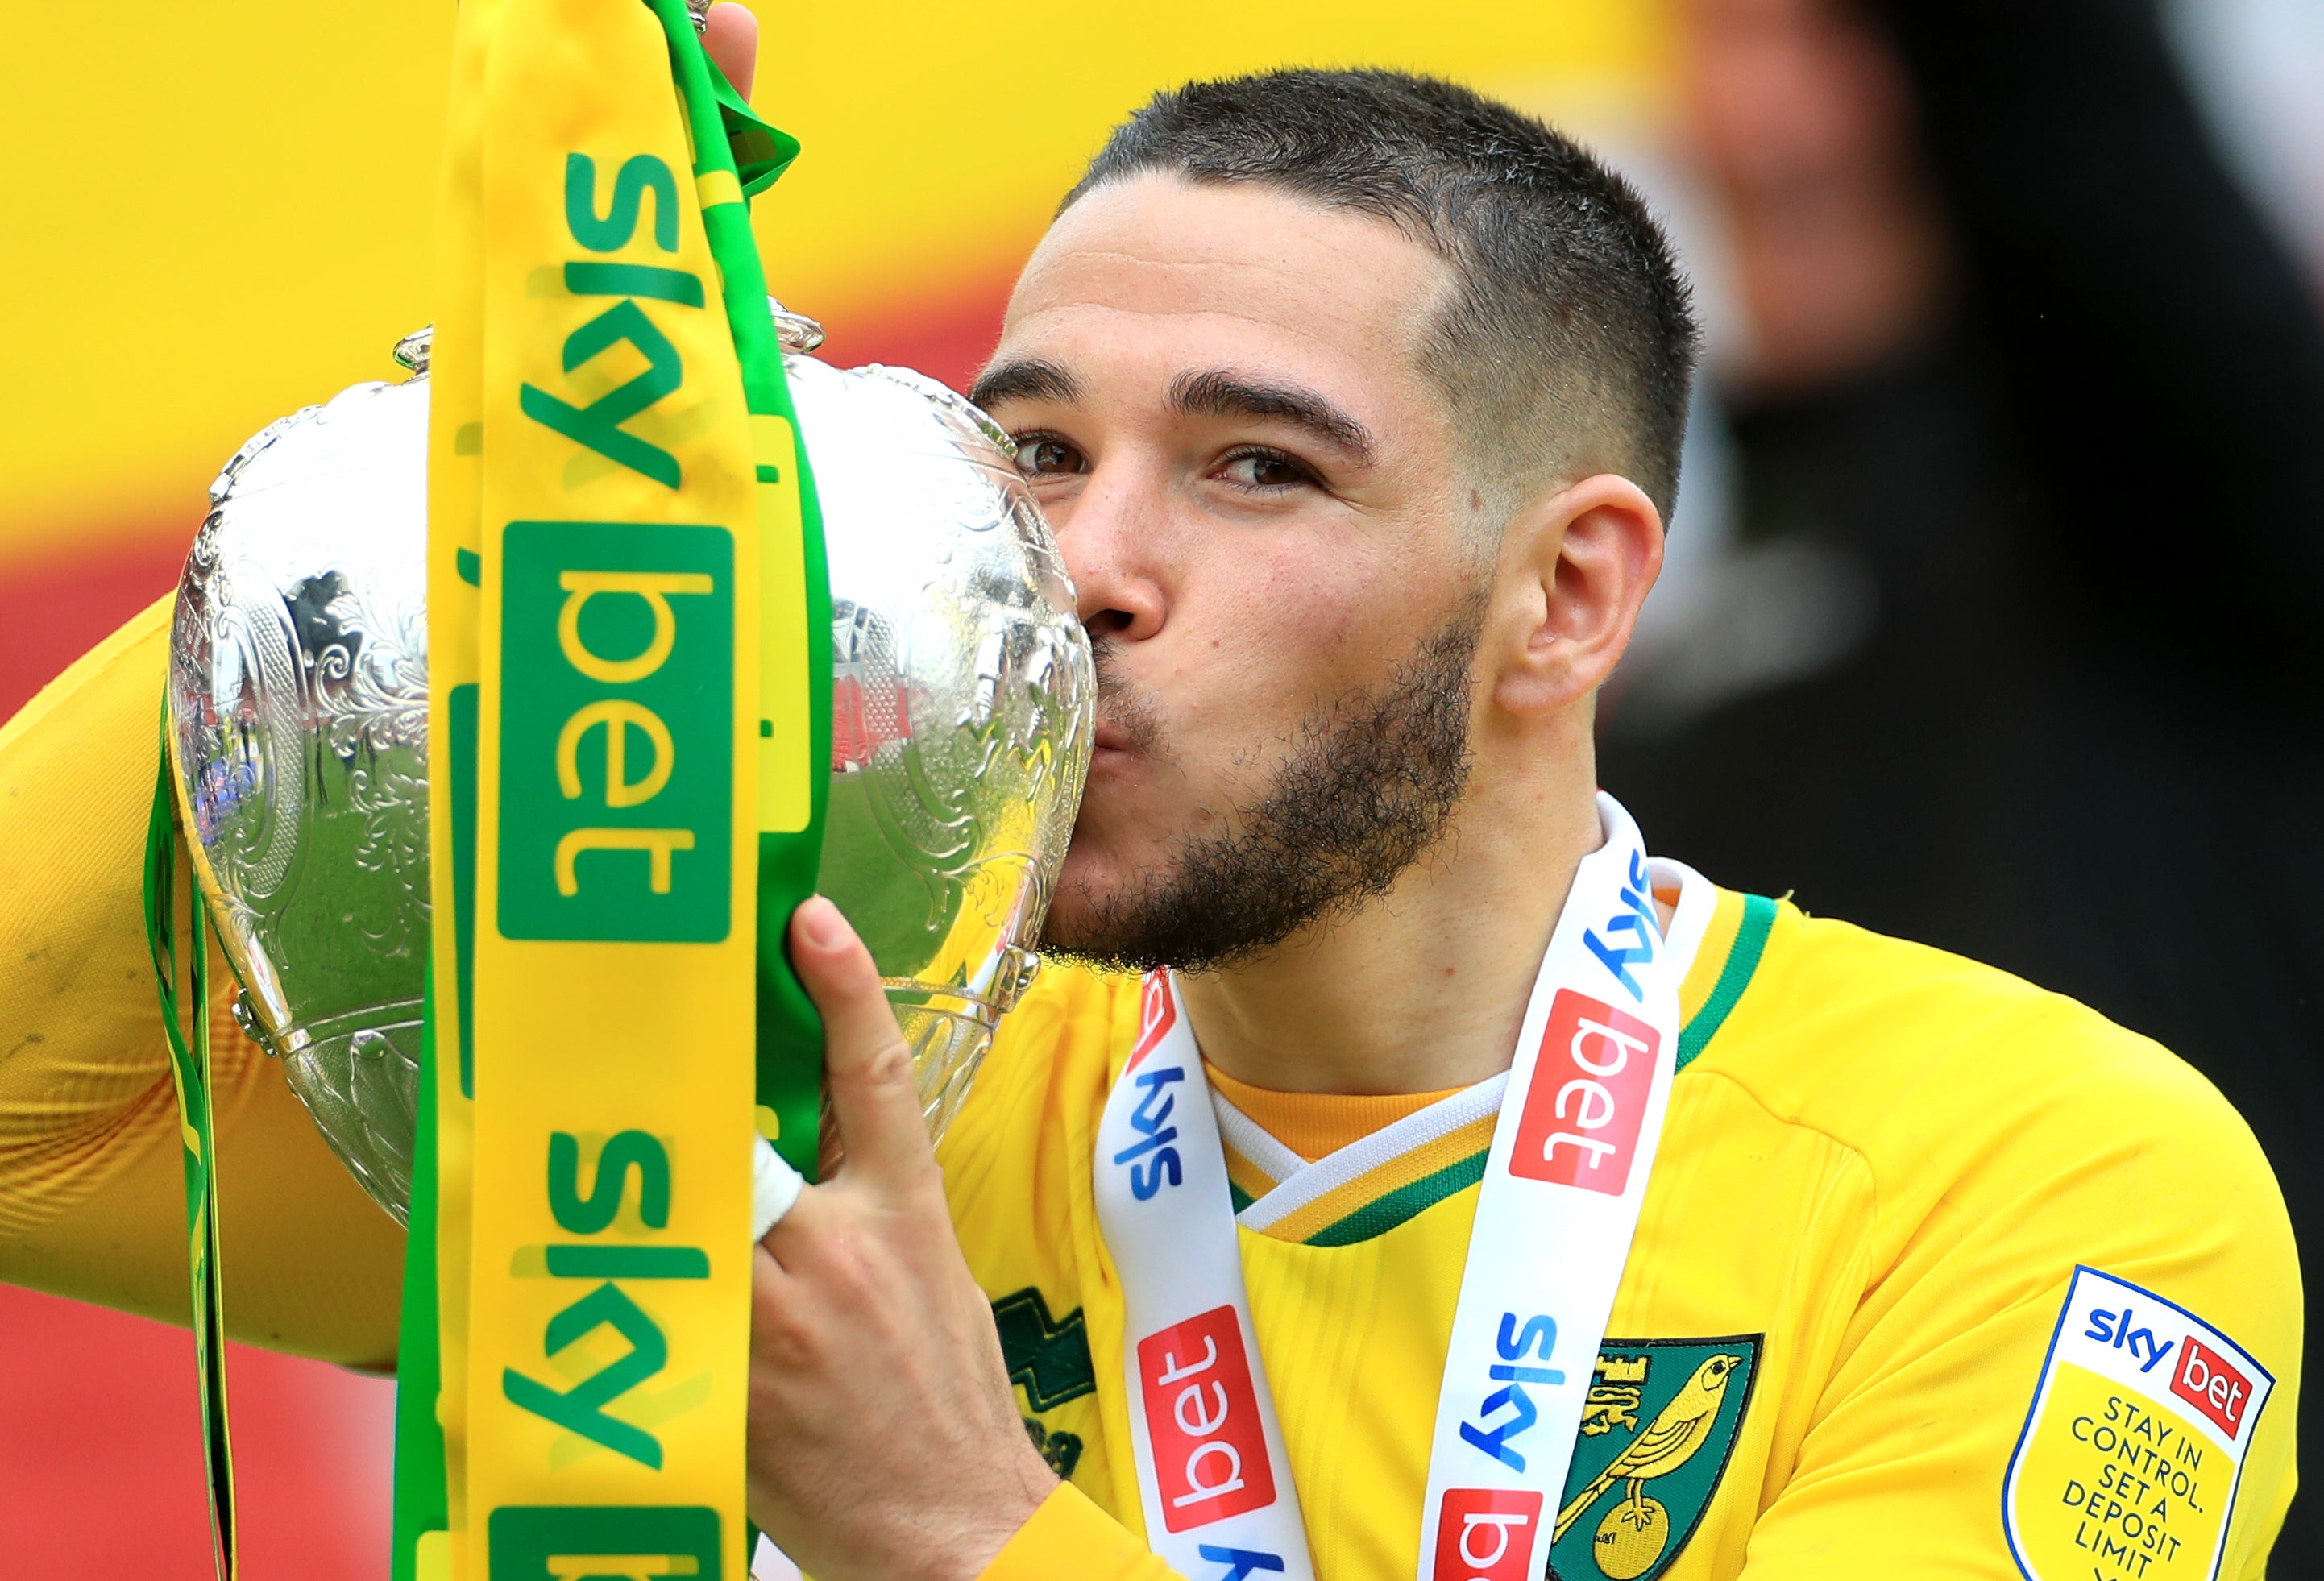 Norwich's Emi Buendia is expected to leave Carrow Road this summer